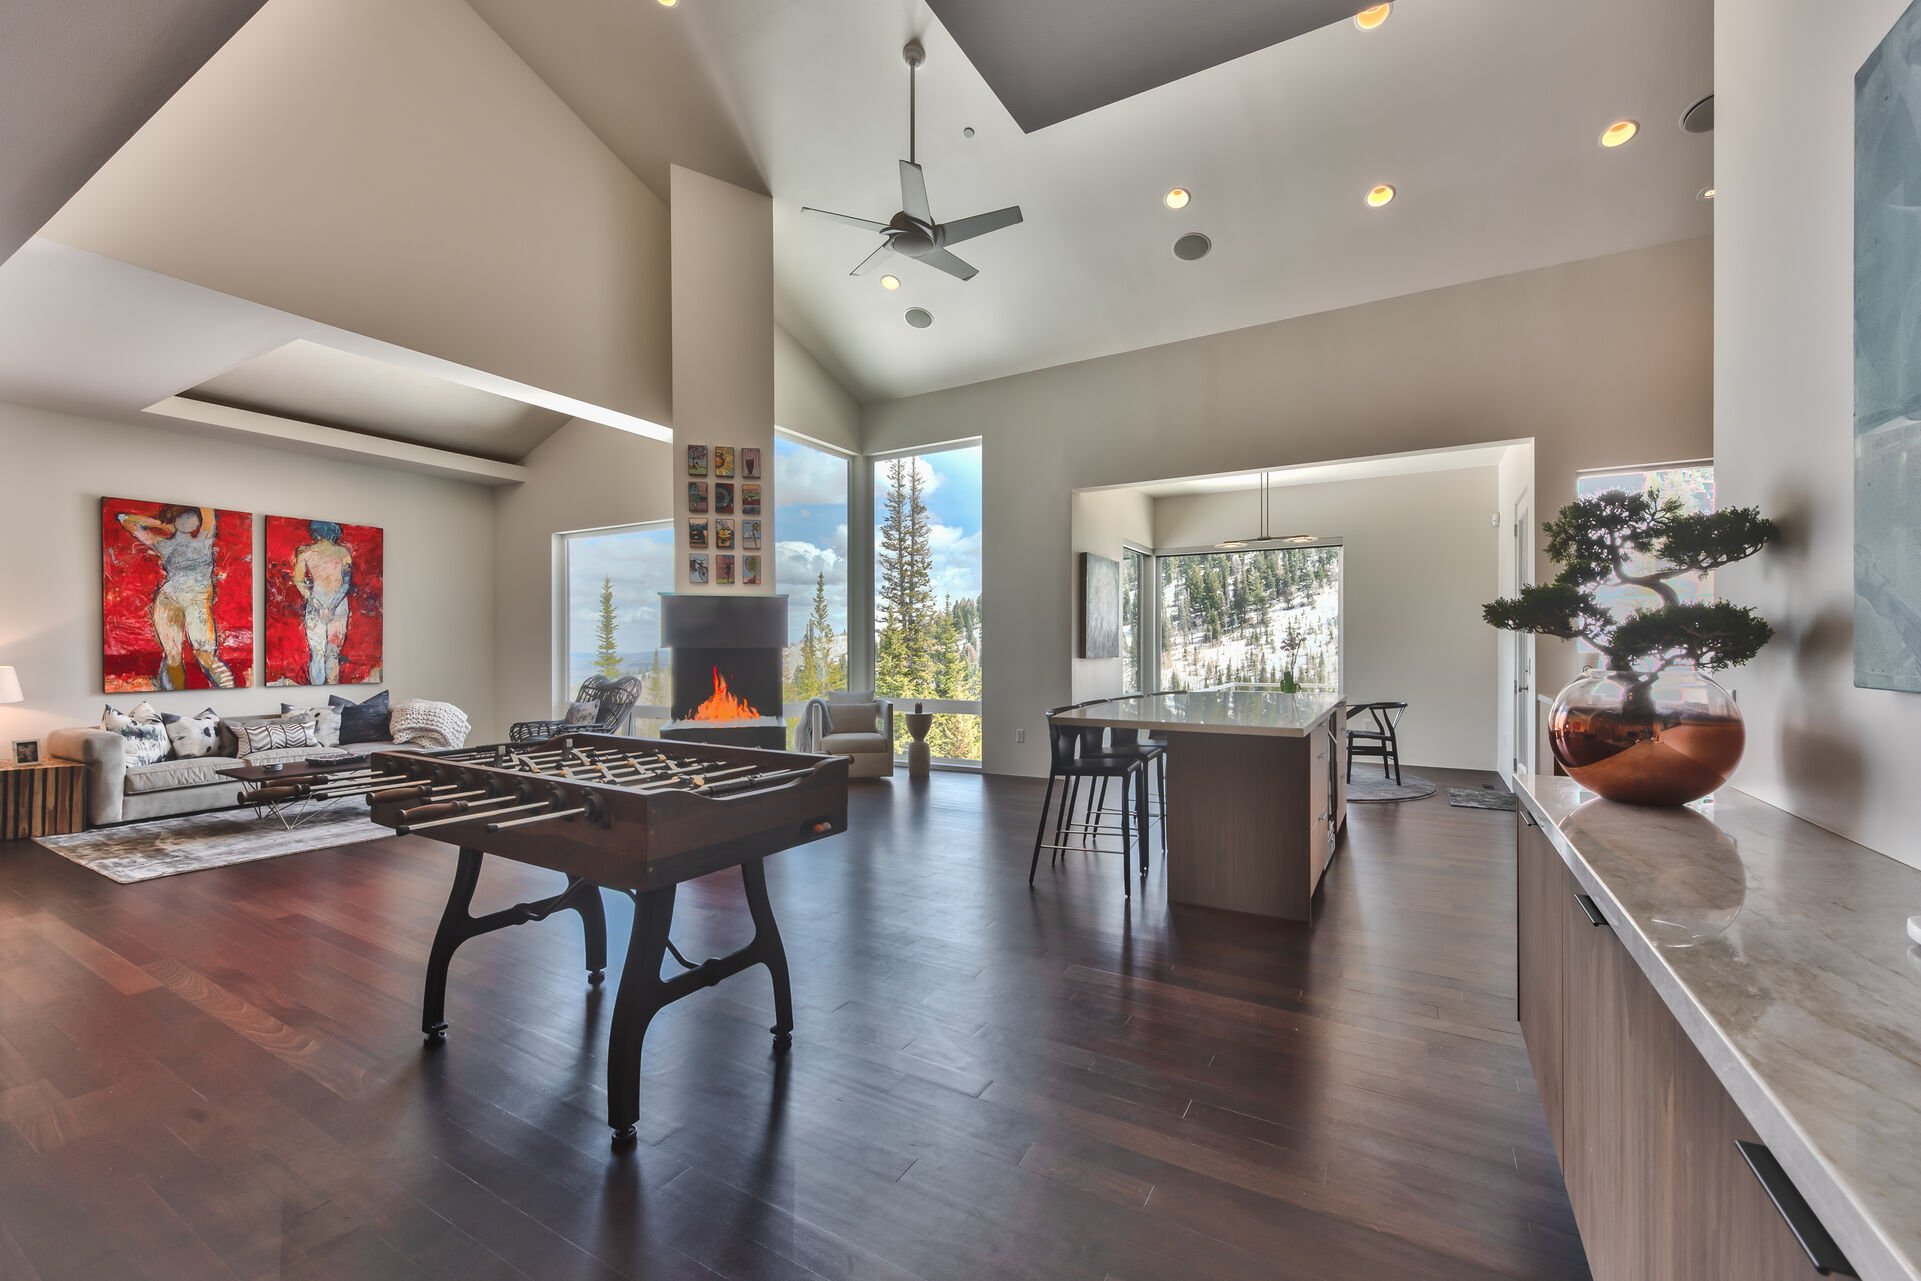 Take in a Game of Foosball, Enjoy the Warm Fireplace, Play the Piano, and Experience the Views while Having Quality Time with Friends and Family